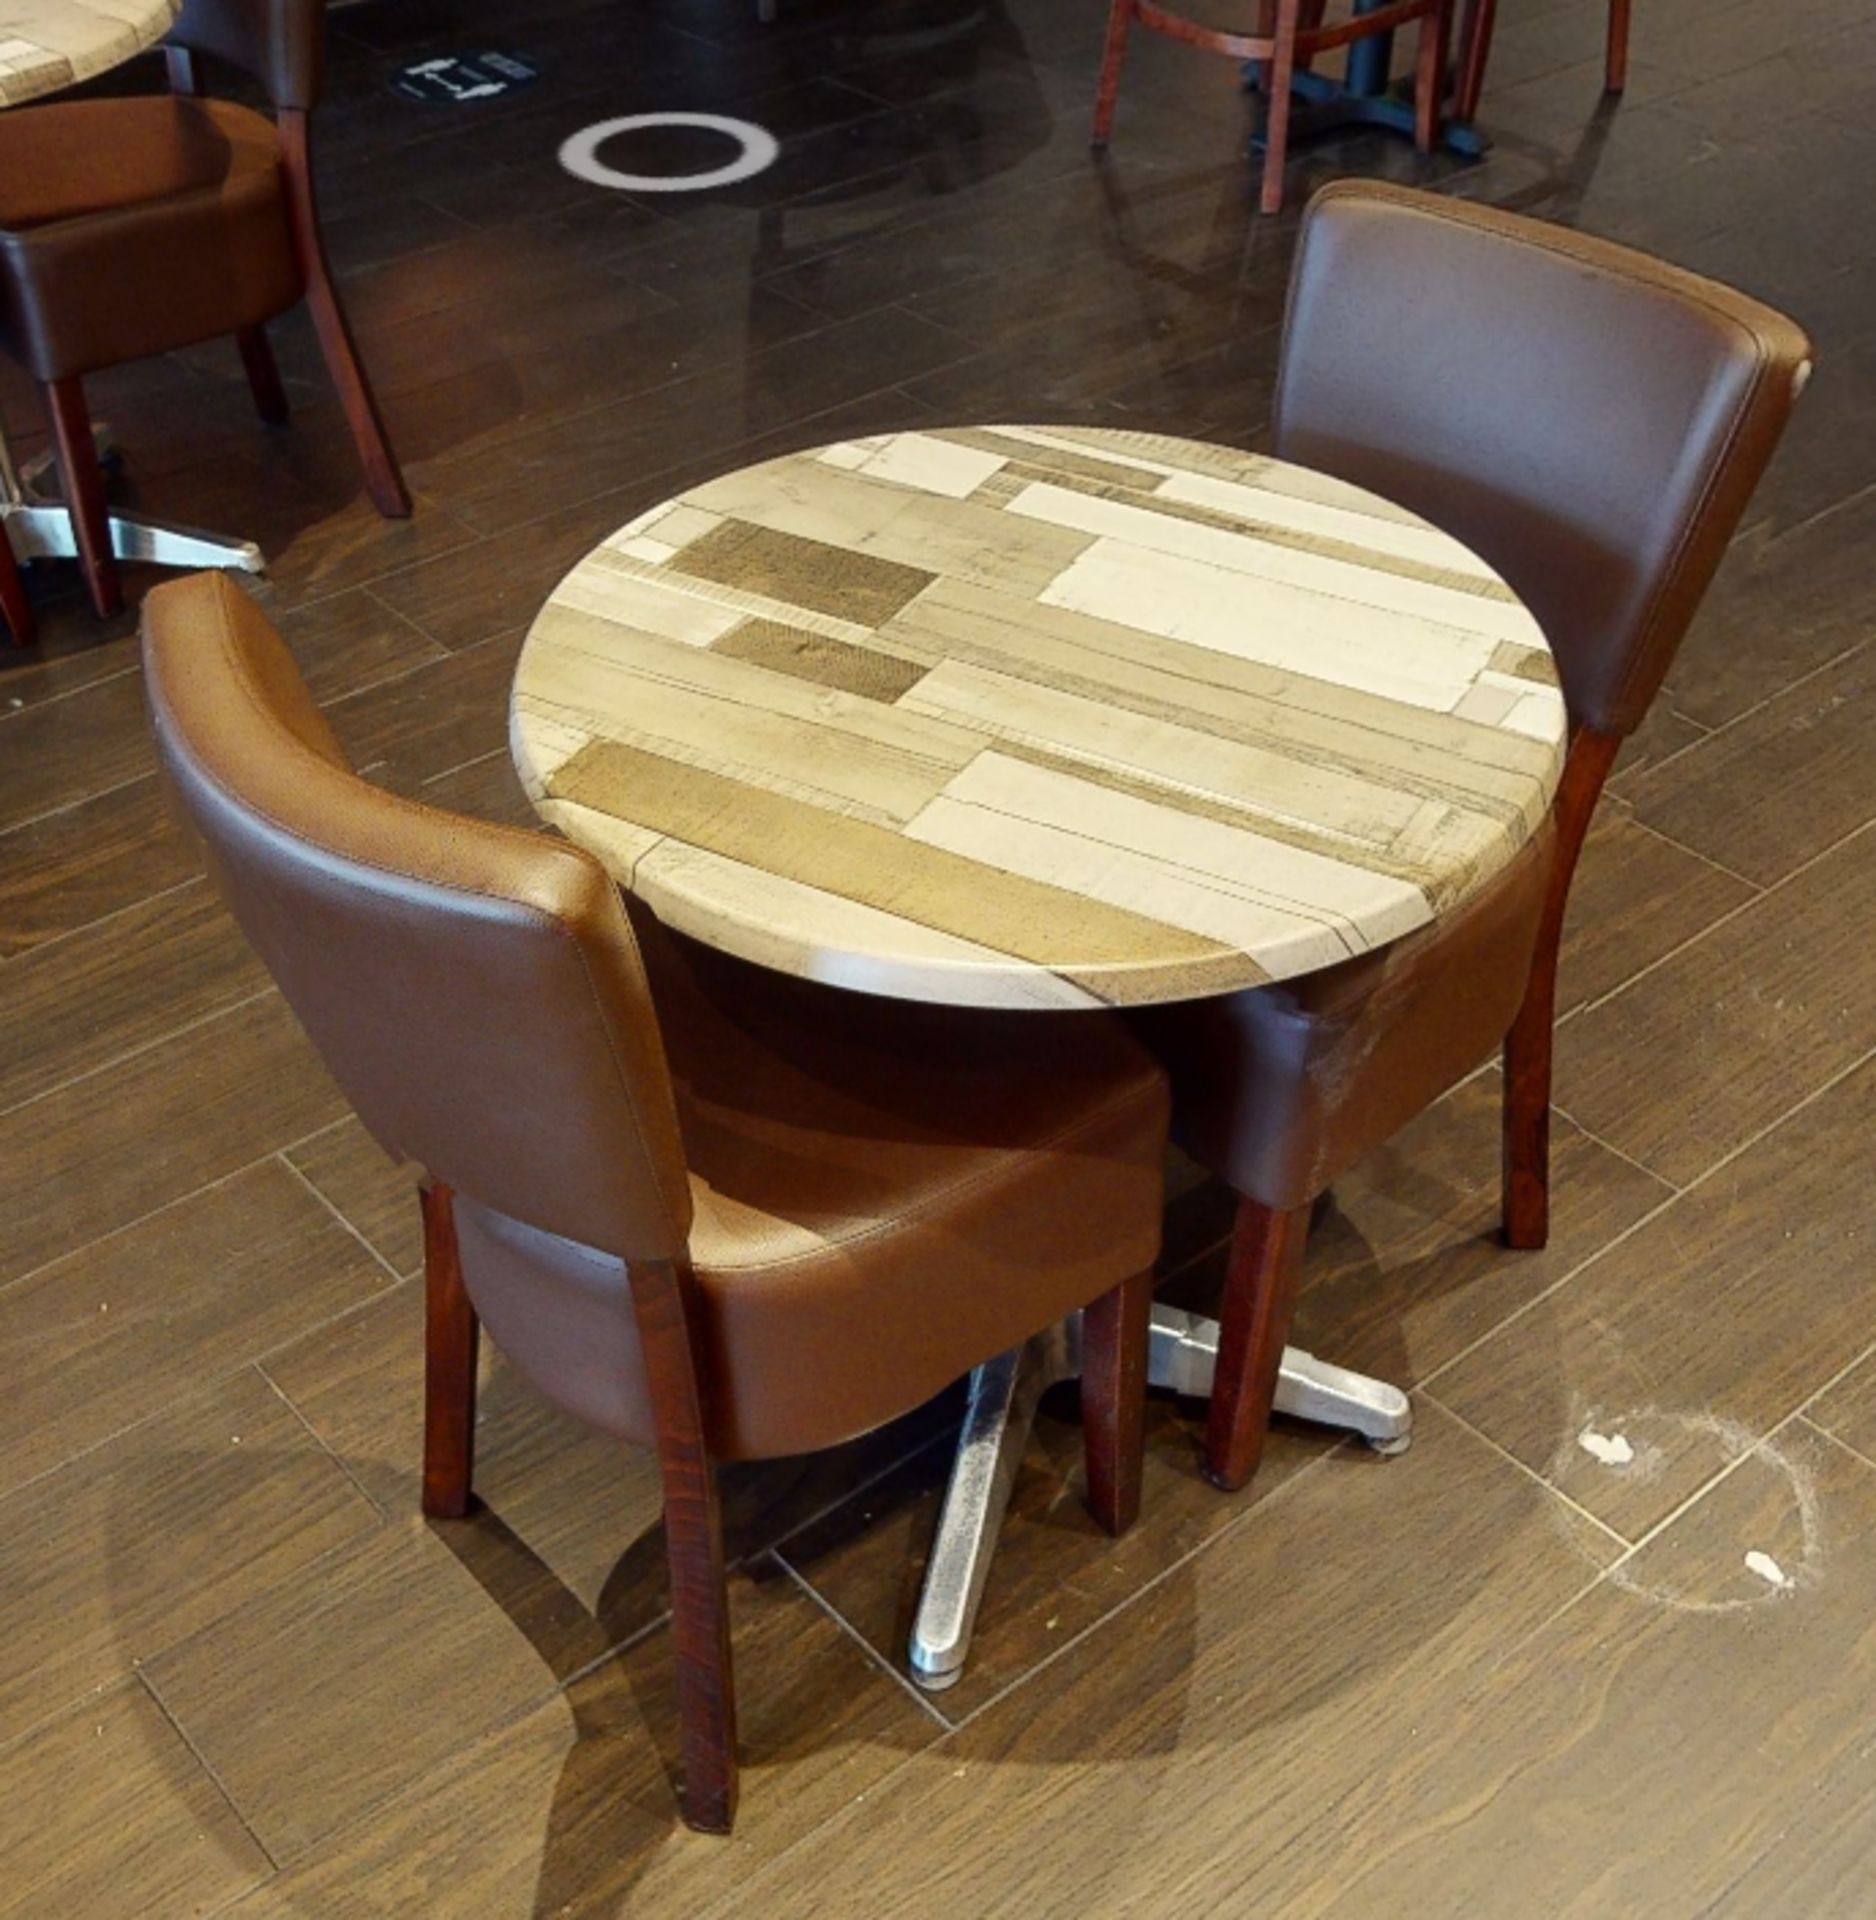 10 x Two Seater Restaurant Tables With Wood Panel Effect Tops and Chromes Bases - CL701 - - Image 8 of 9